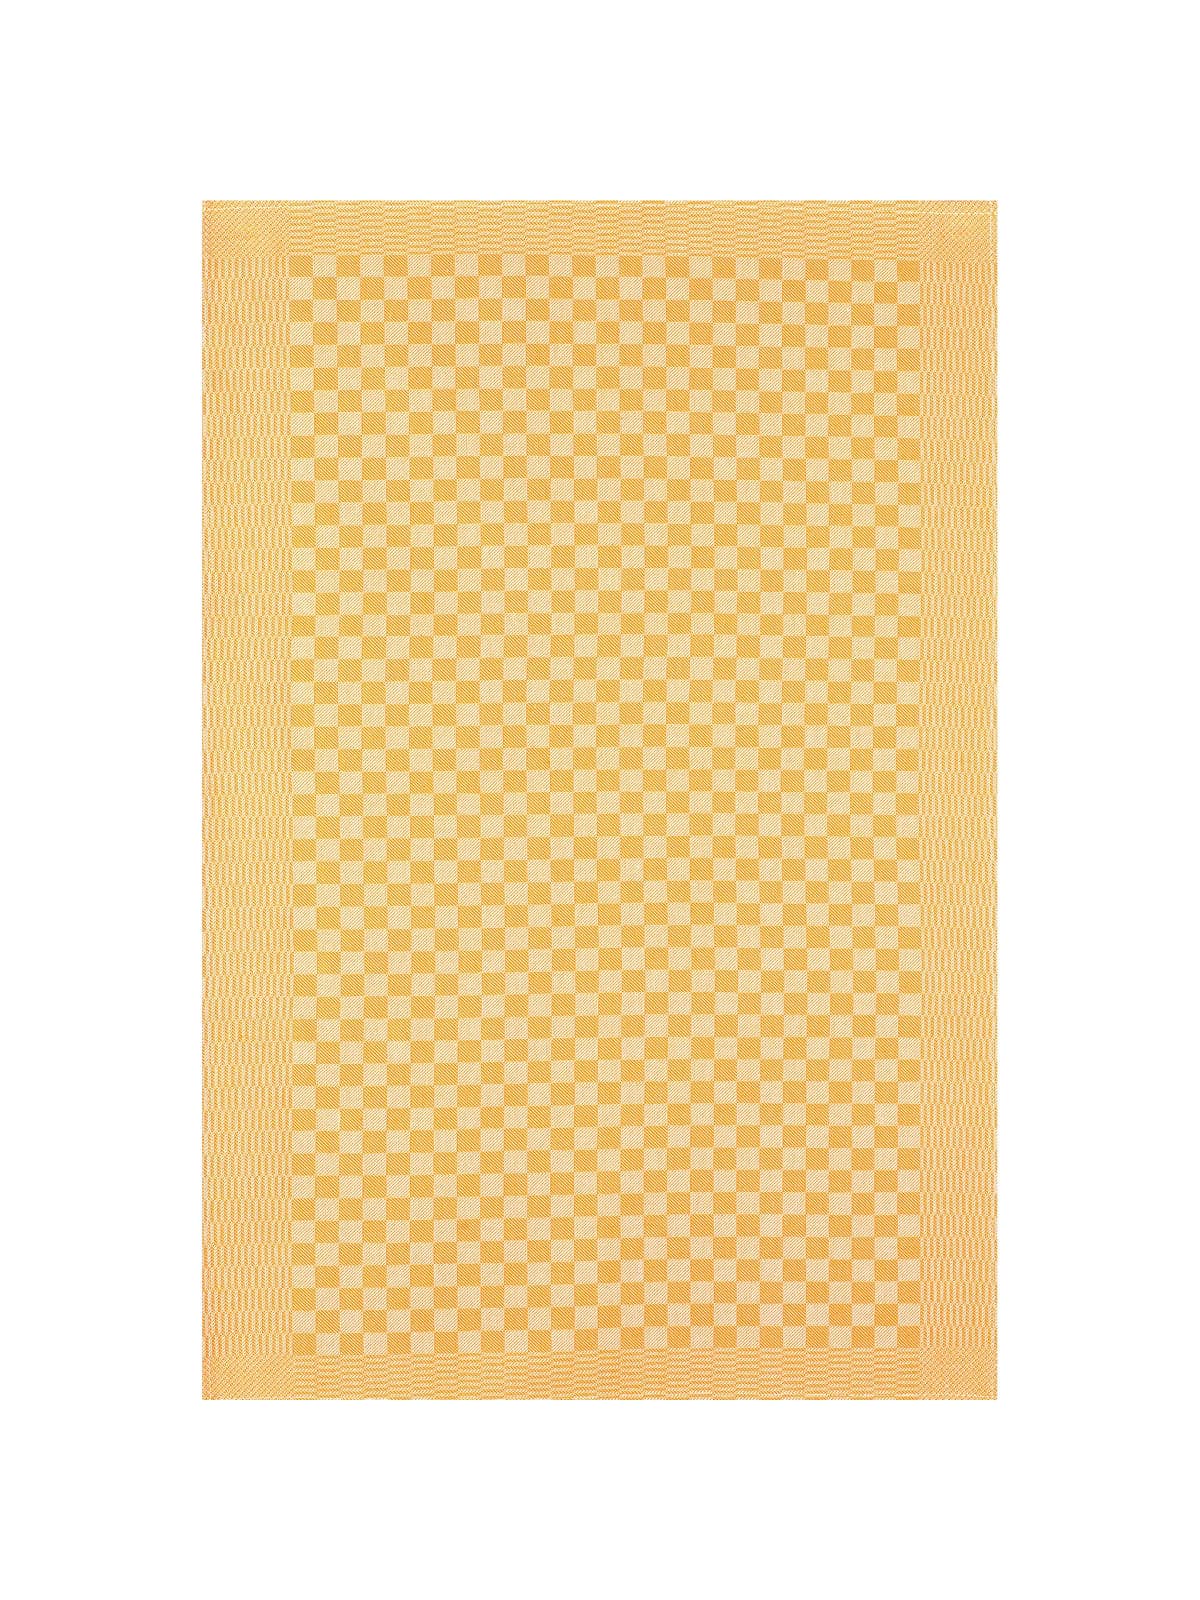 Pit Towel Yellow - 12 Pcs by Kitchen & Table Linens -  ChefsCotton